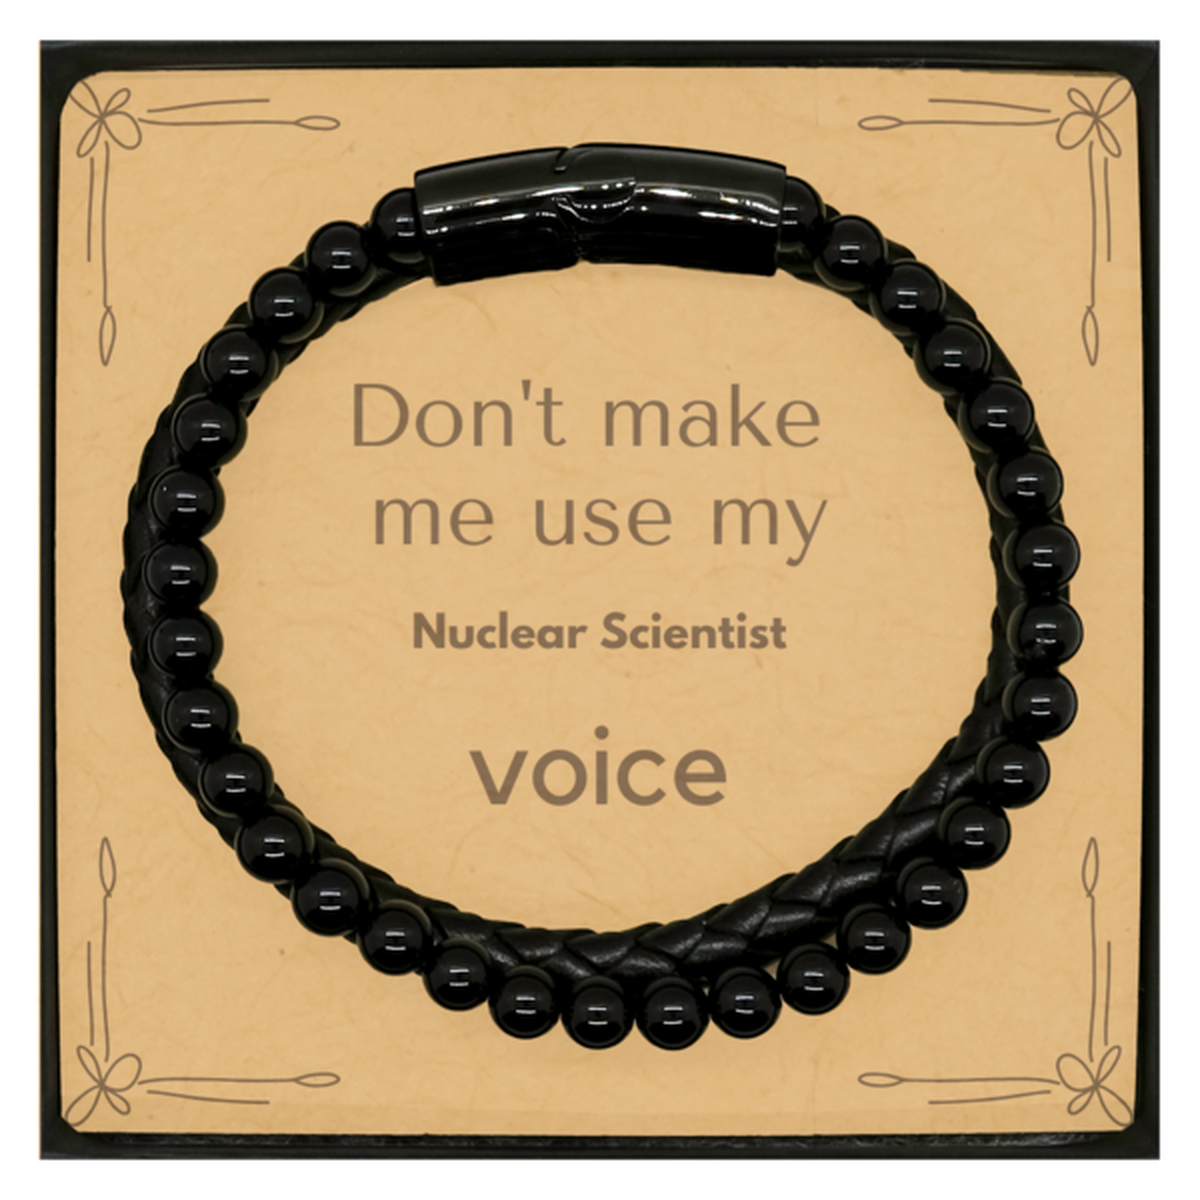 Don't make me use my Nuclear Scientist voice, Sarcasm Nuclear Scientist Card Gifts, Christmas Nuclear Scientist Stone Leather Bracelets Birthday Unique Gifts For Nuclear Scientist Coworkers, Men, Women, Colleague, Friends